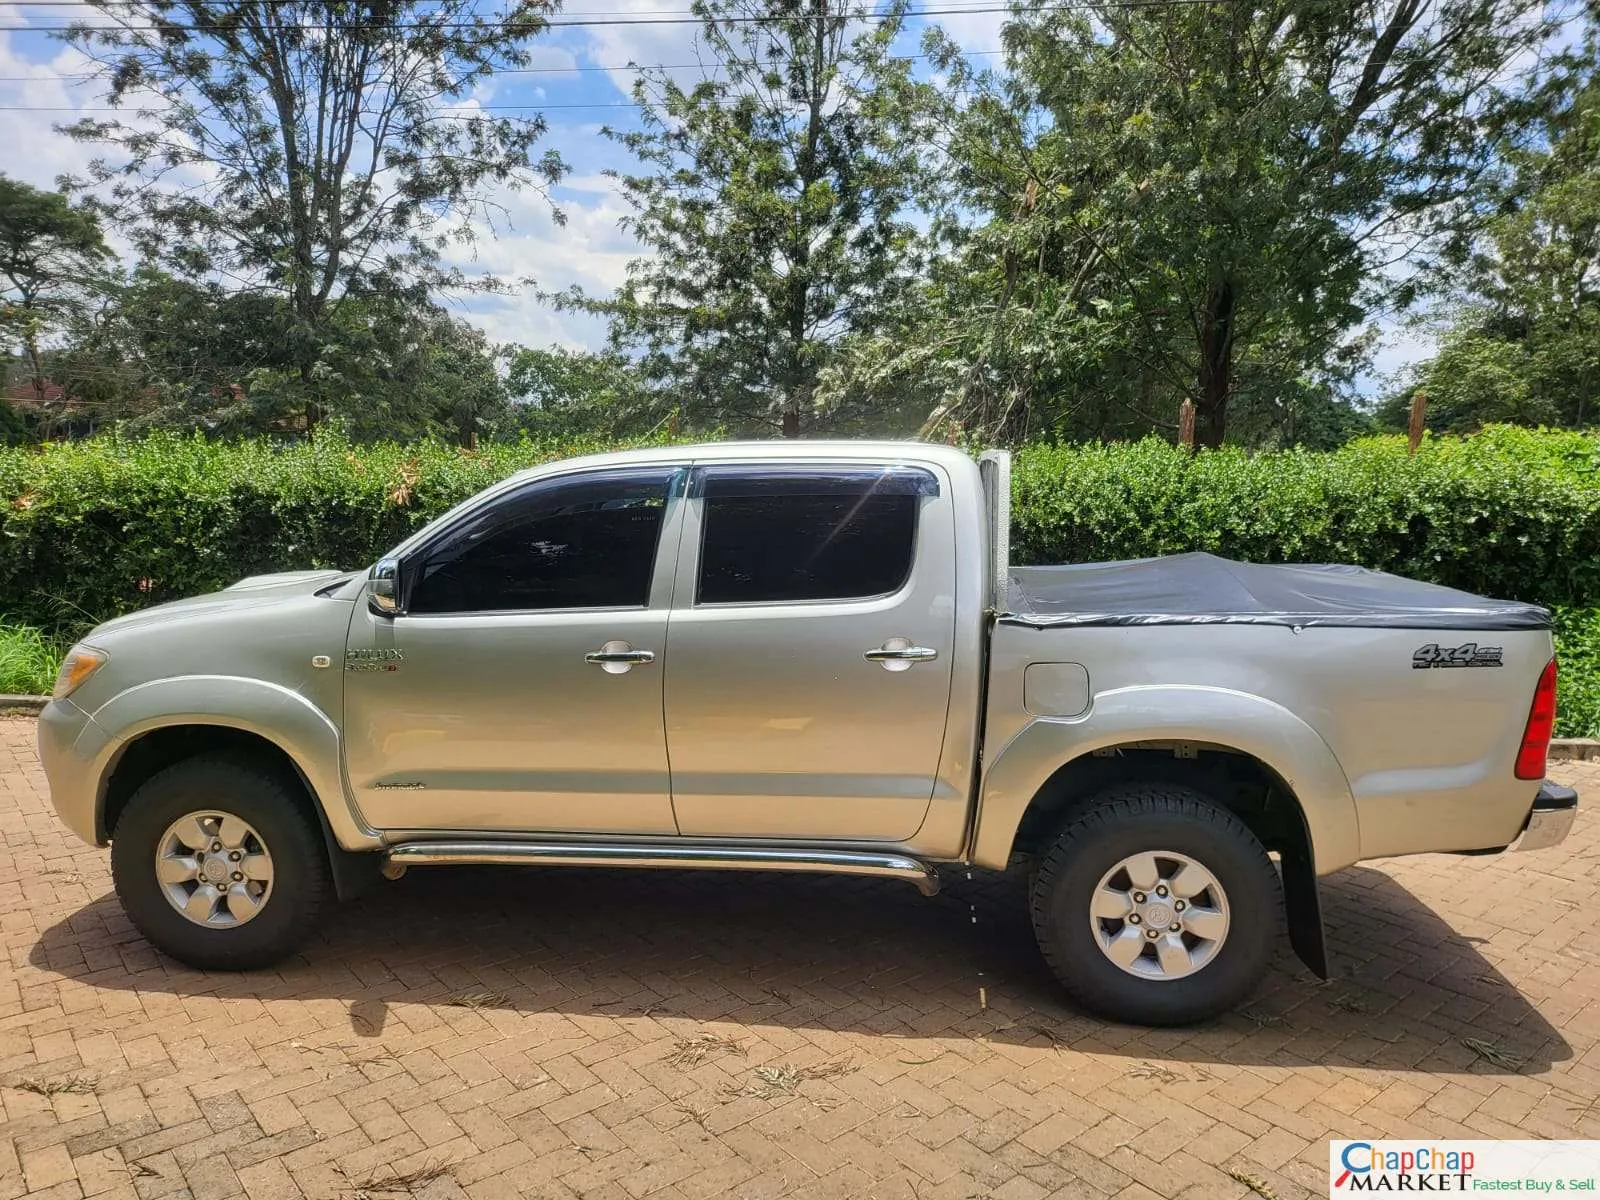 Toyota Hilux Auto Double cab QUICK SALE You Pay 30% Deposit trade in OK Hire purchase installments manual